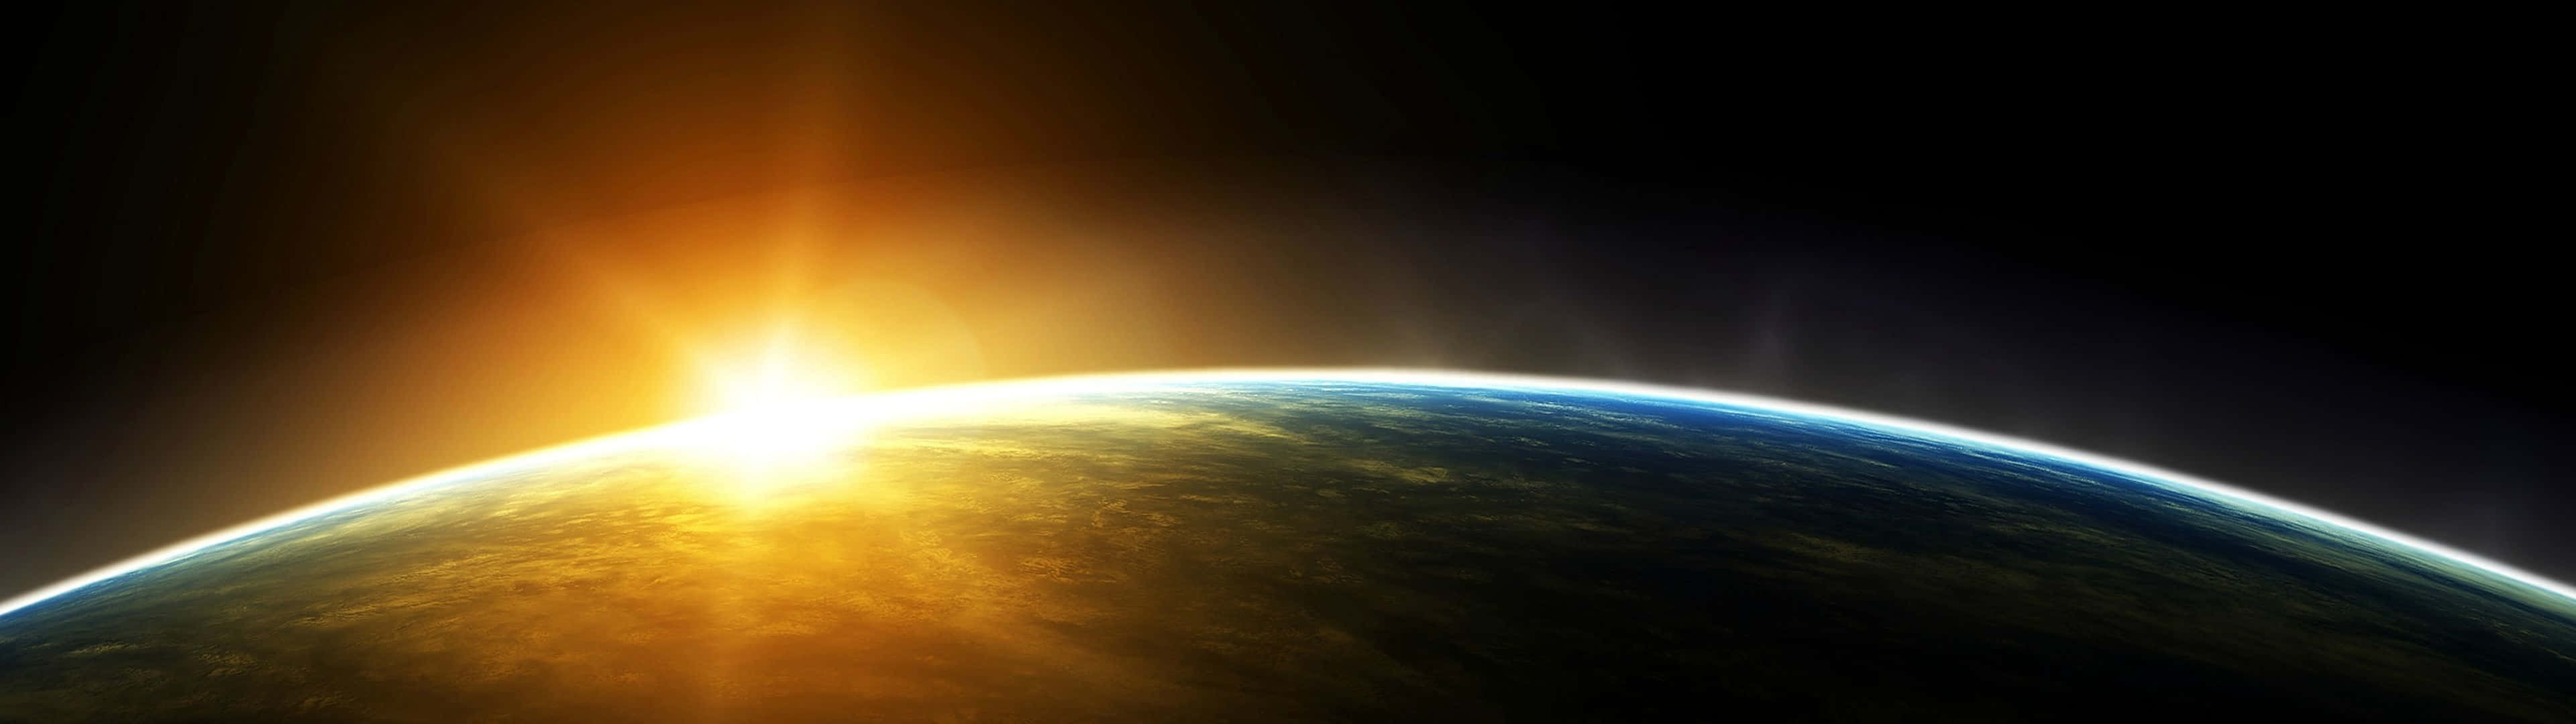 The Sun Rising Over The Earth Wallpaper